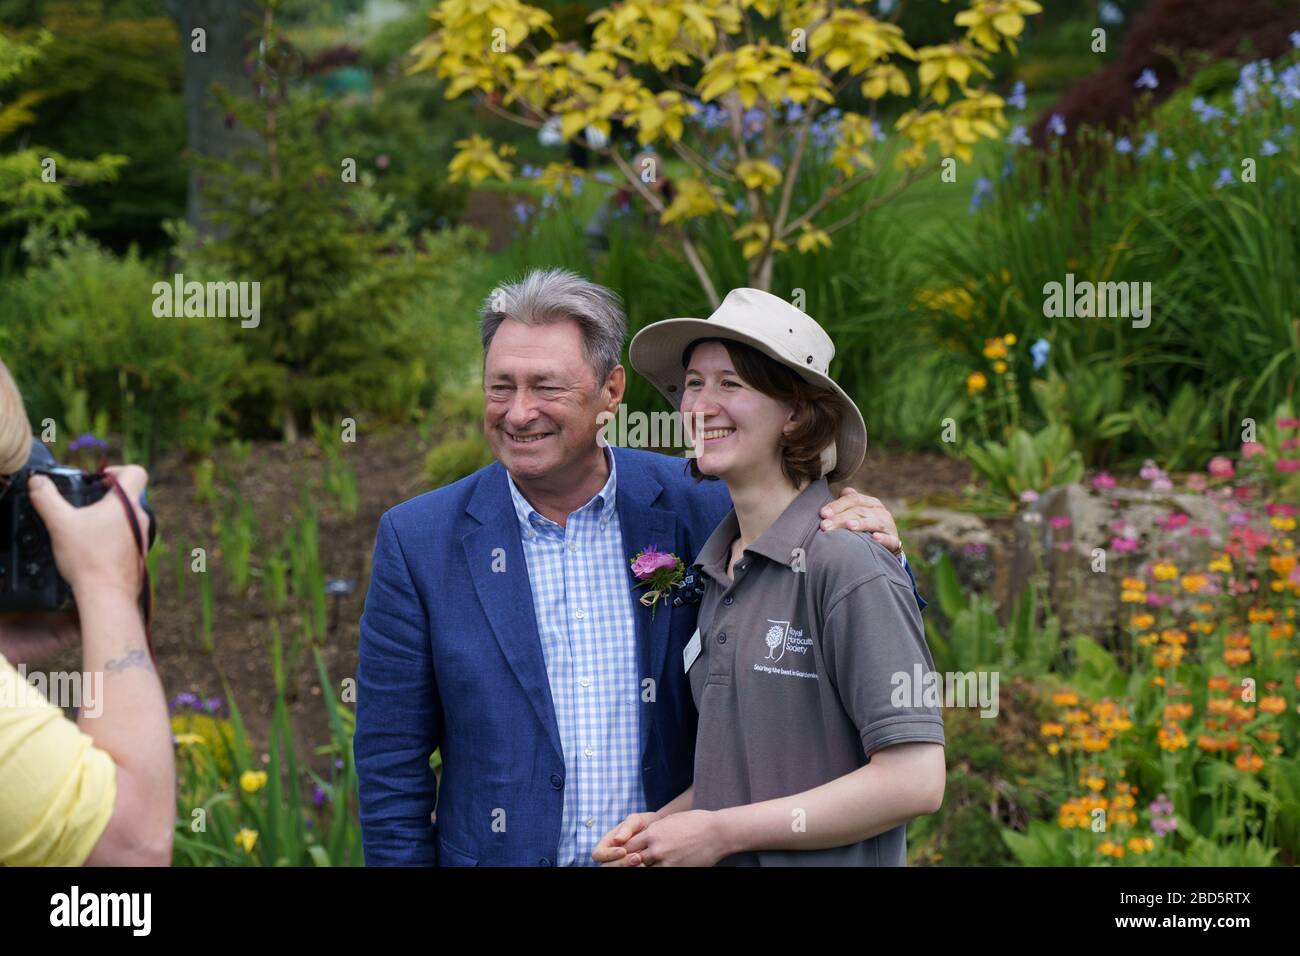 Alan Titchmarsh posing for a photo with a female RHS Gardener at a flower show to celebrate 70 years of RHS Garden Harlow Carr, Harrogate, UK. Stock Photo